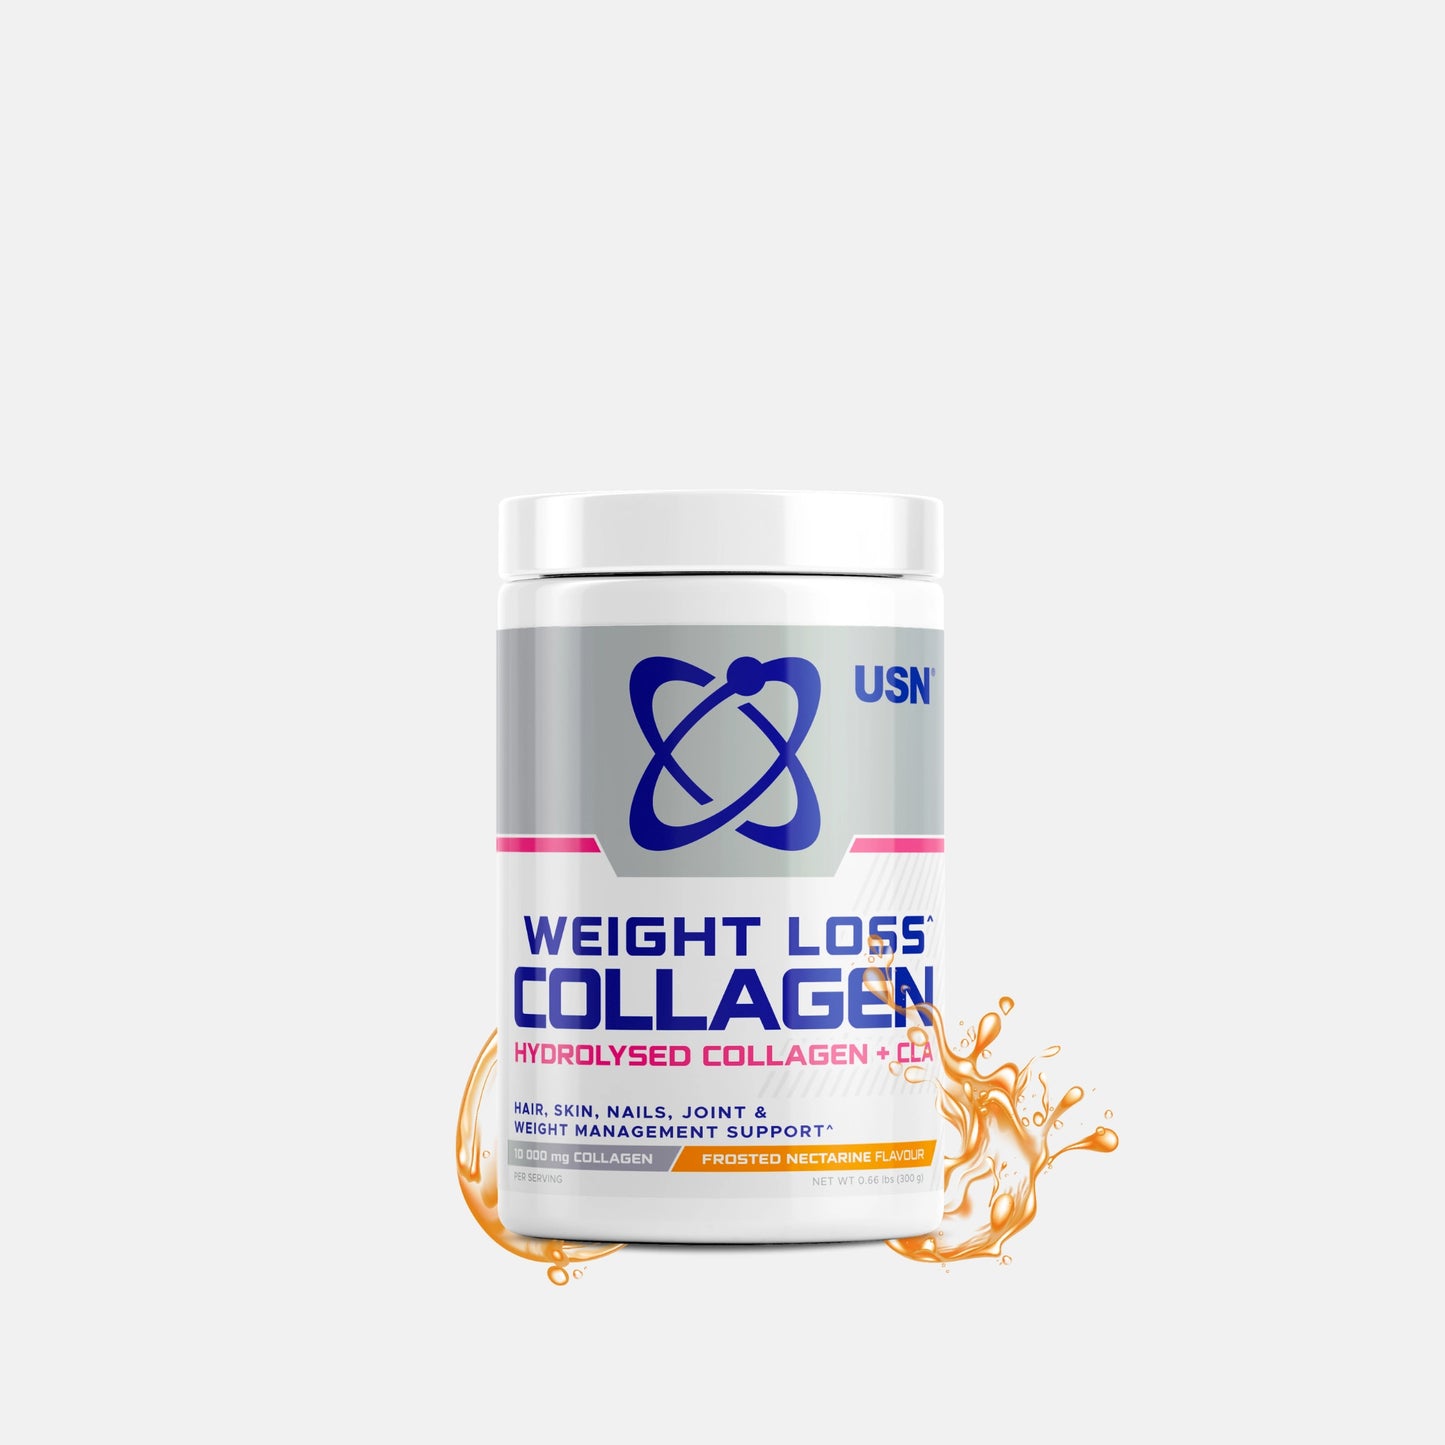 USN-weight-loss-collagen-frosted-nectarine